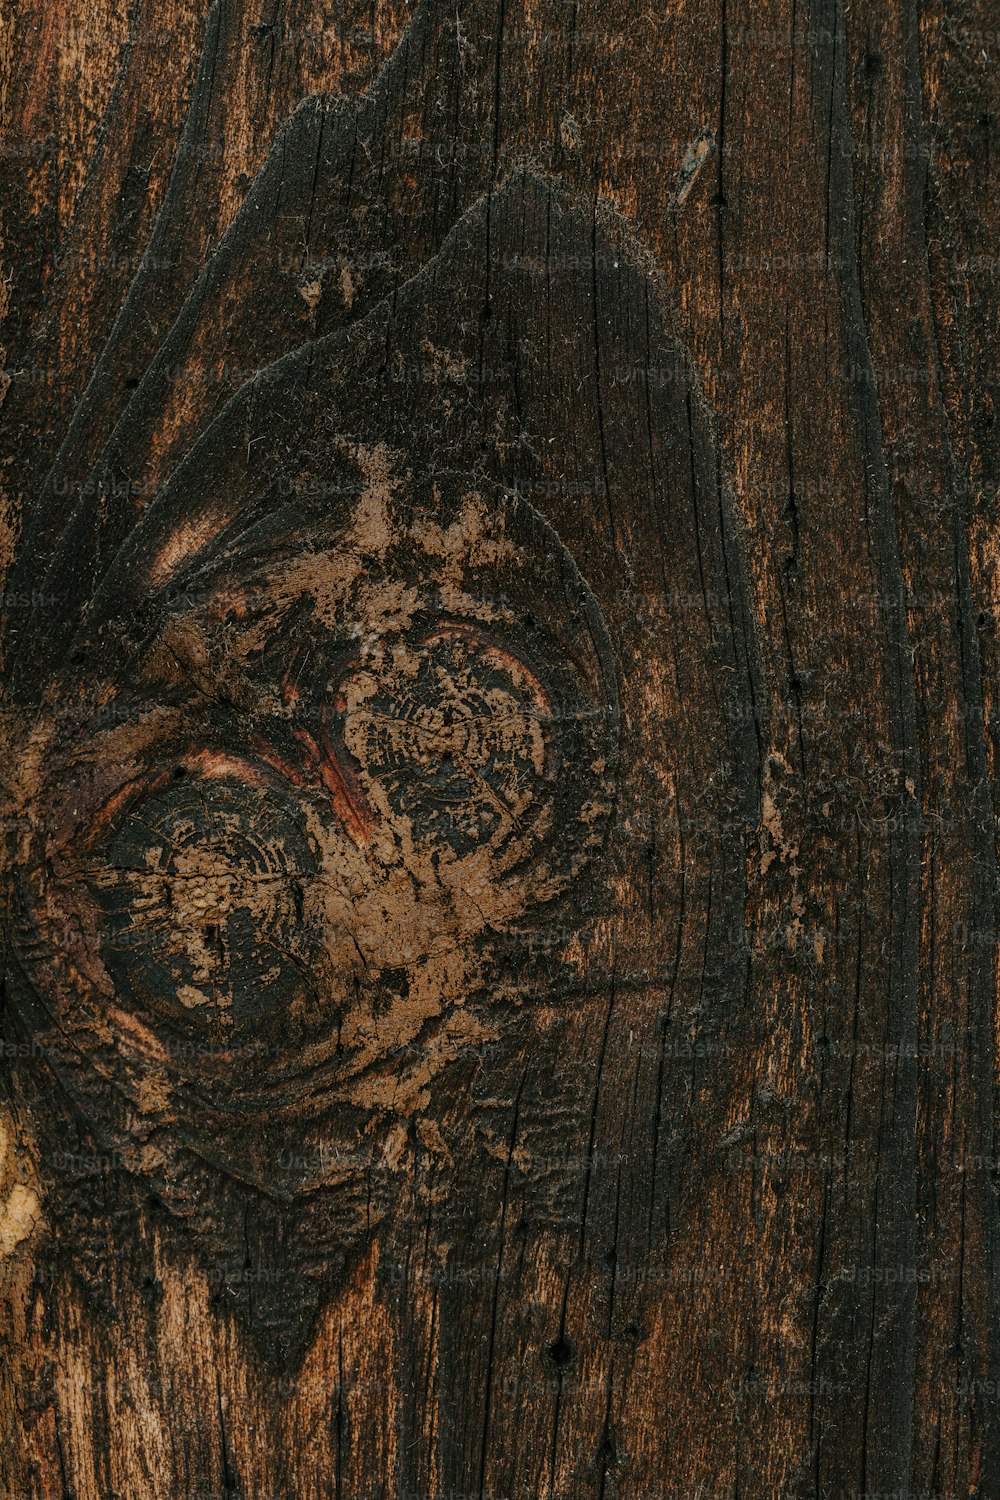 a close up of a piece of wood with a bird's eye